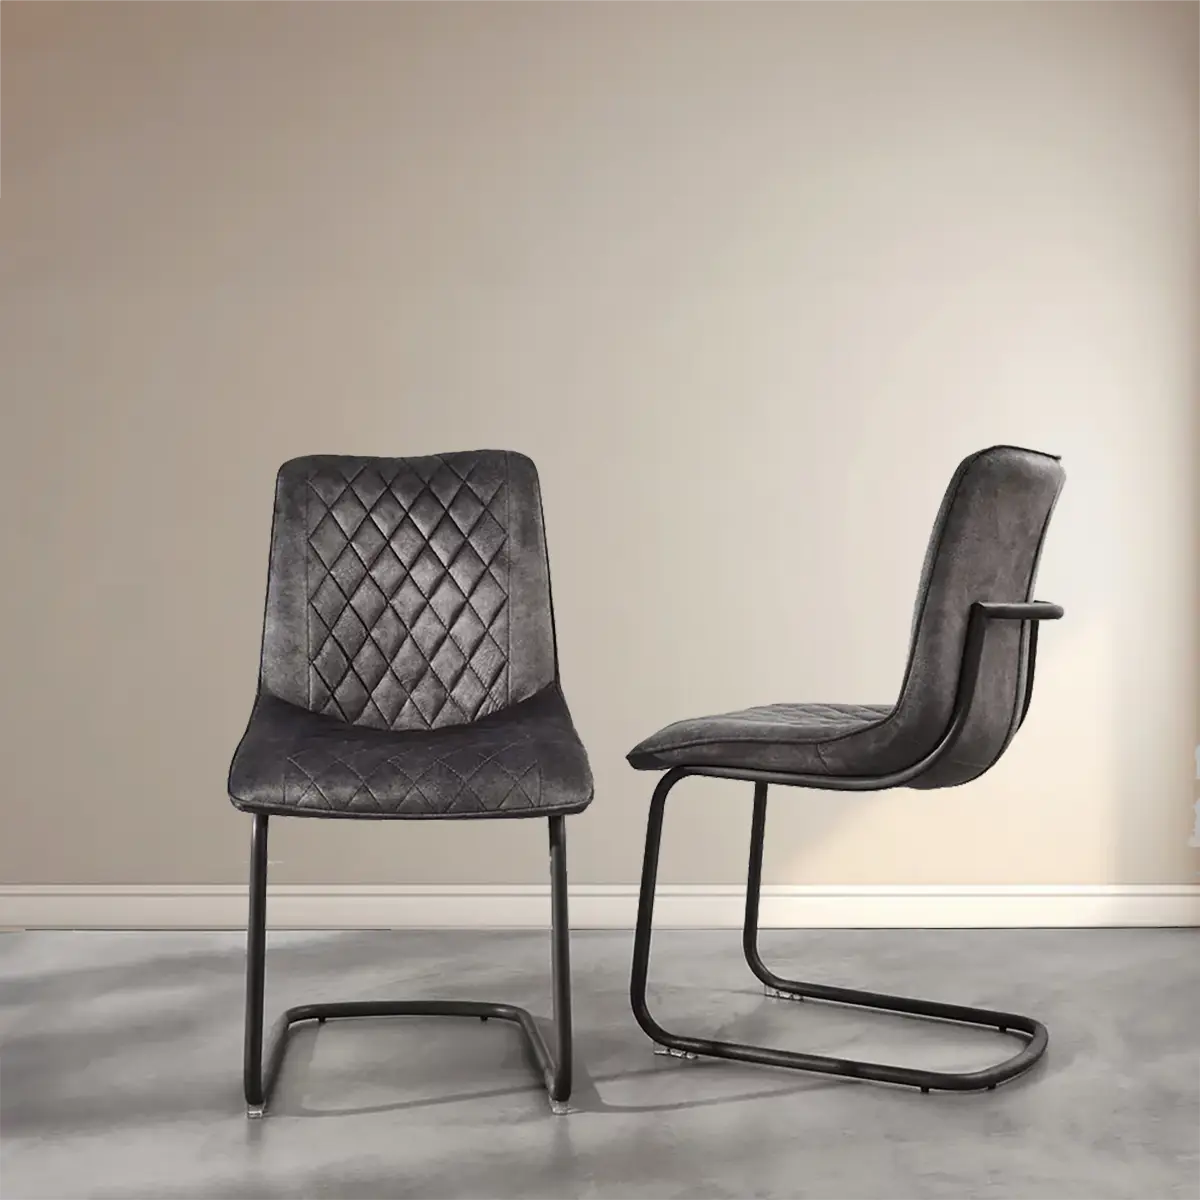 Creed Charcoal Grey Dining Chair